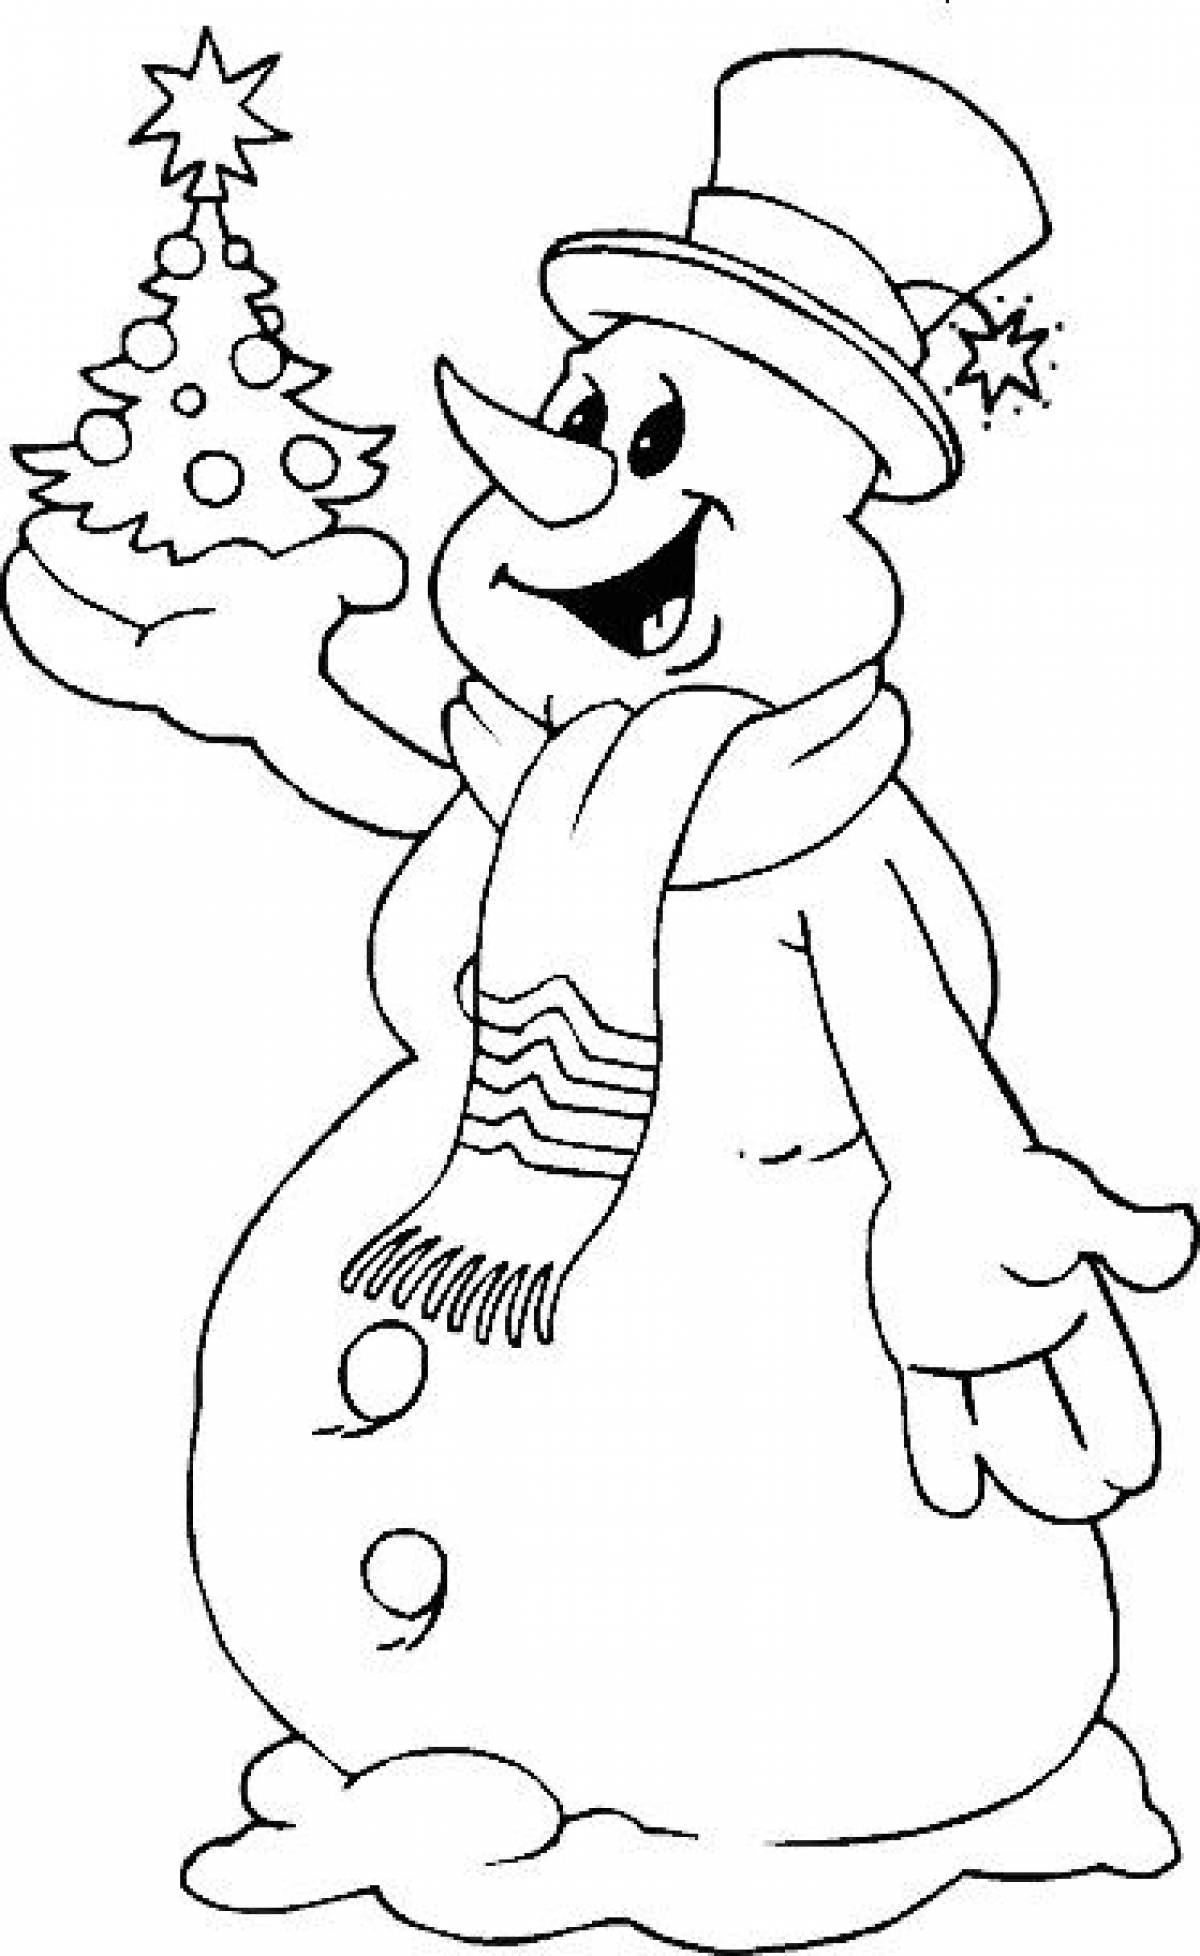 Snowman coloring page for new year